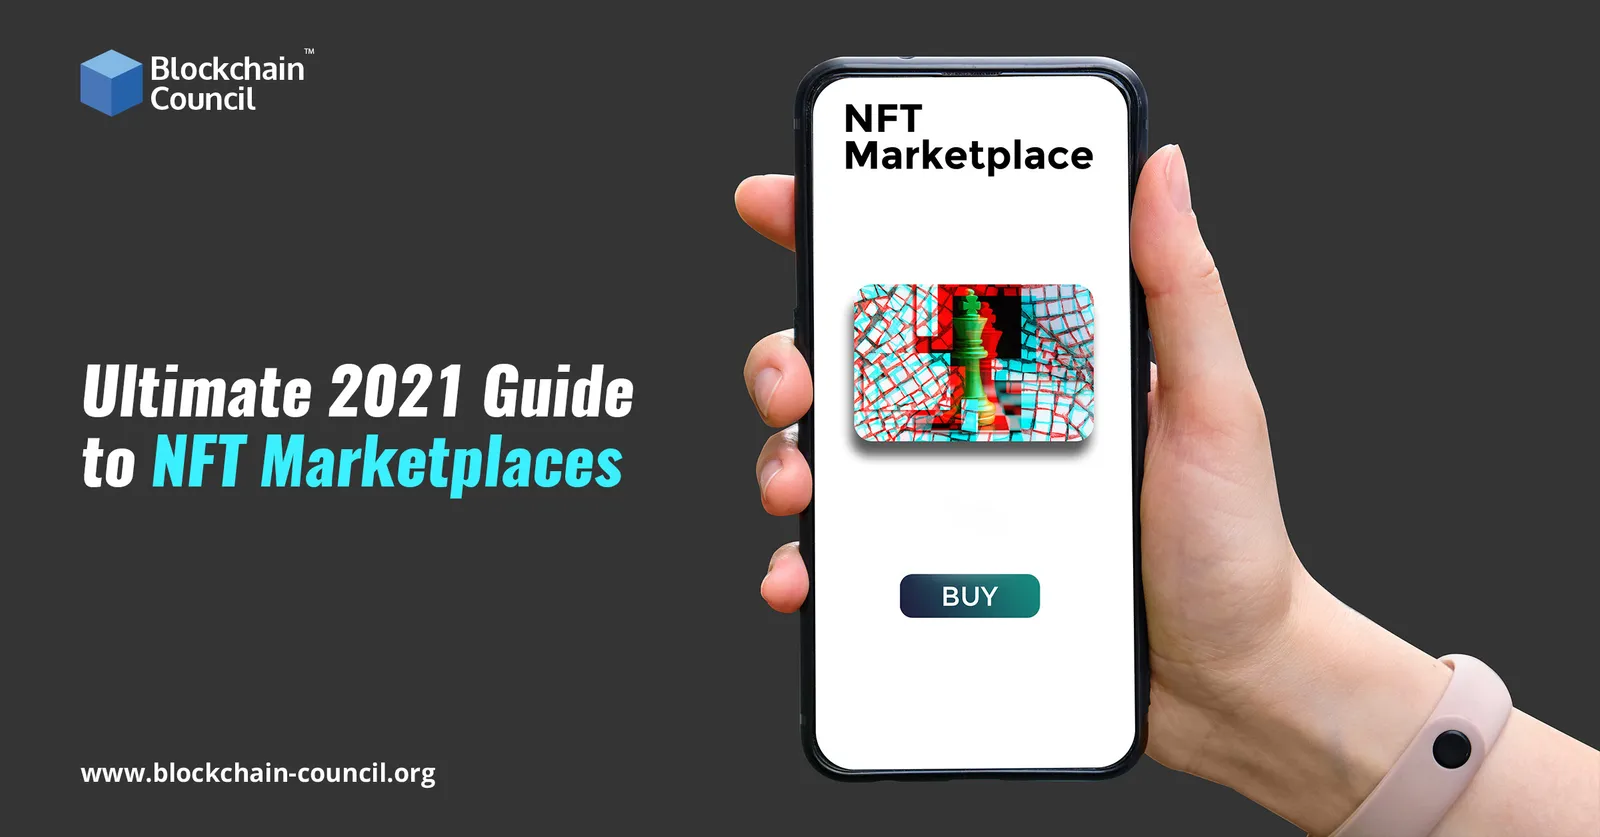 The Ultimate 2021 Guide to NFT Markets